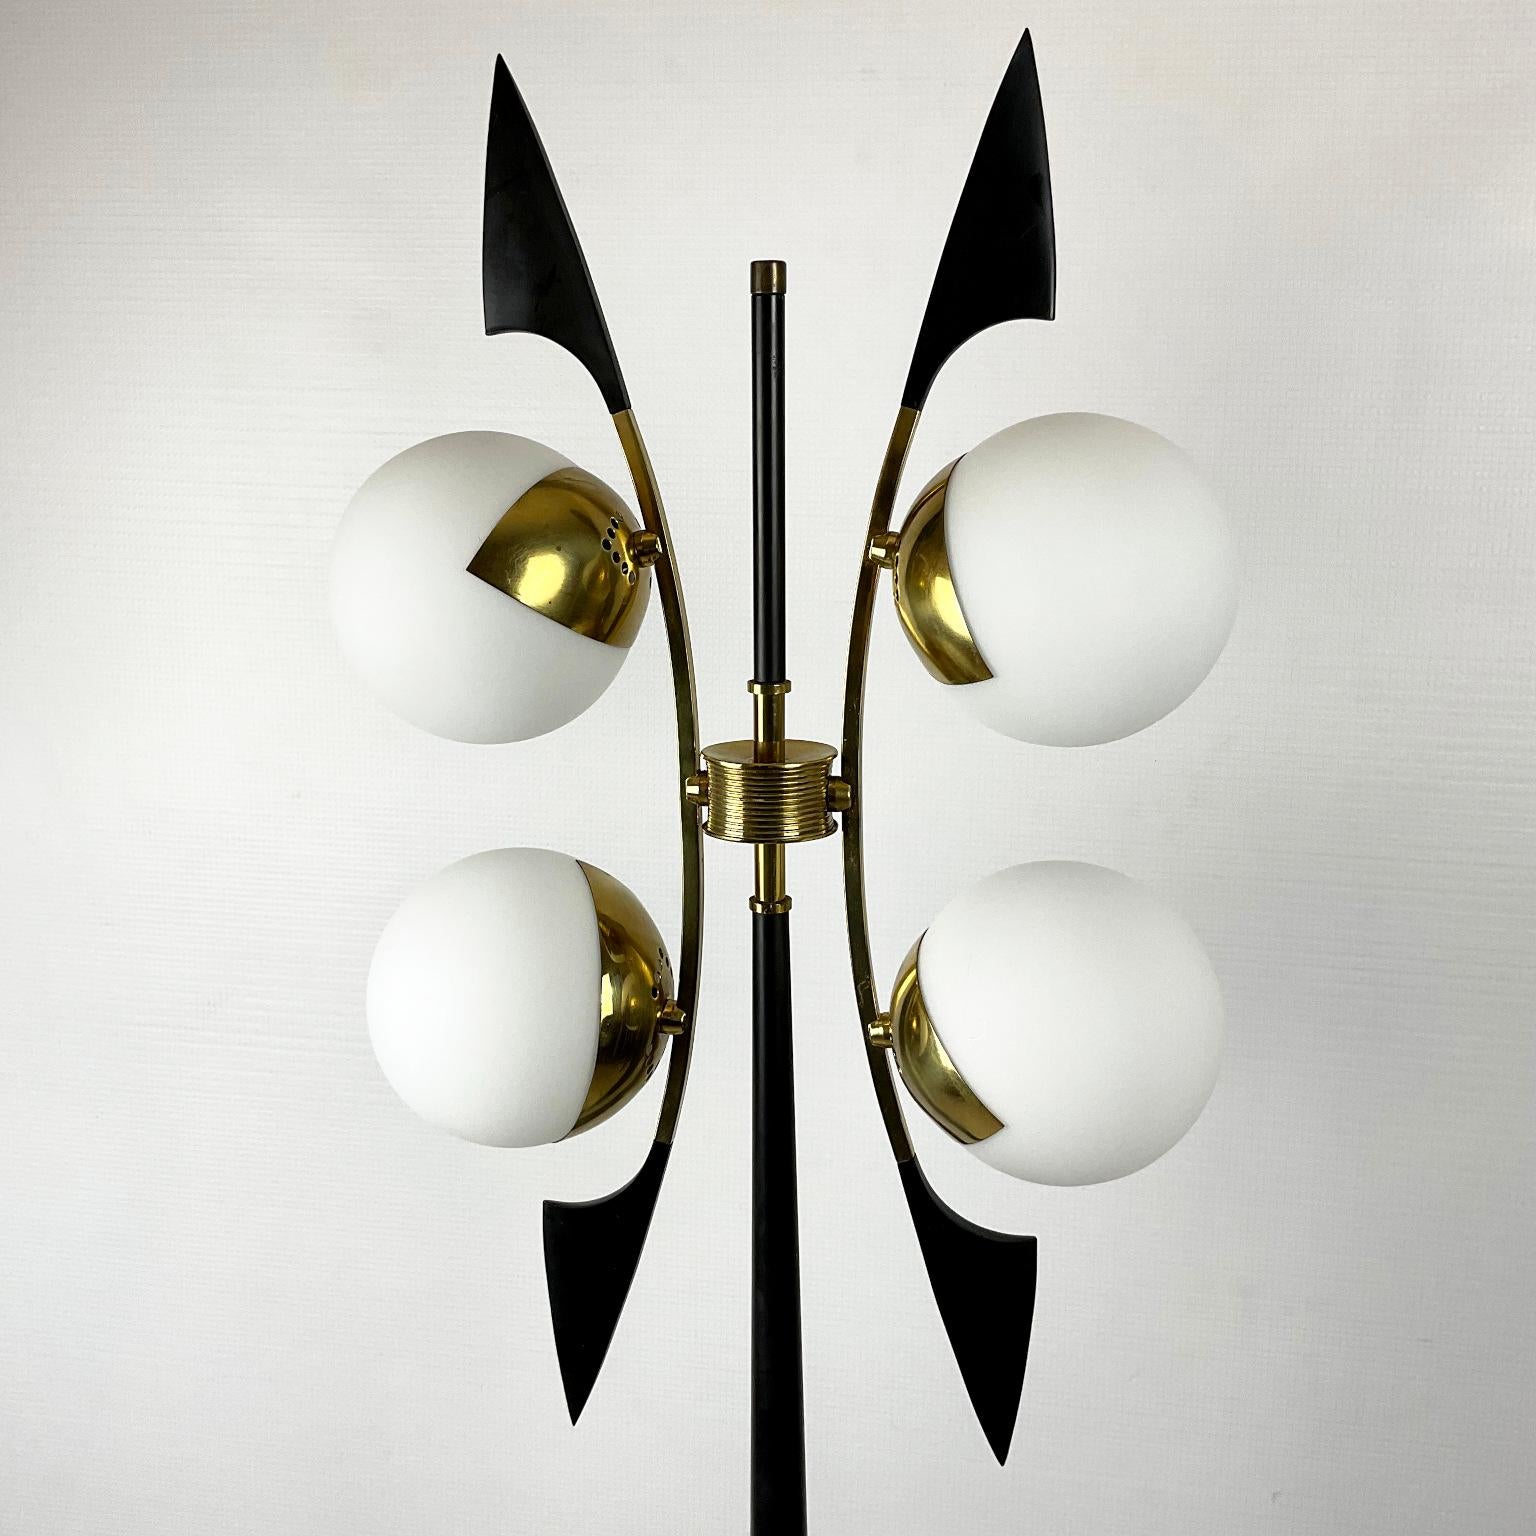 20th Century 1950s Floor Lamp Edited by Maison Arlus with Four Globes and Brass Saber Finish For Sale